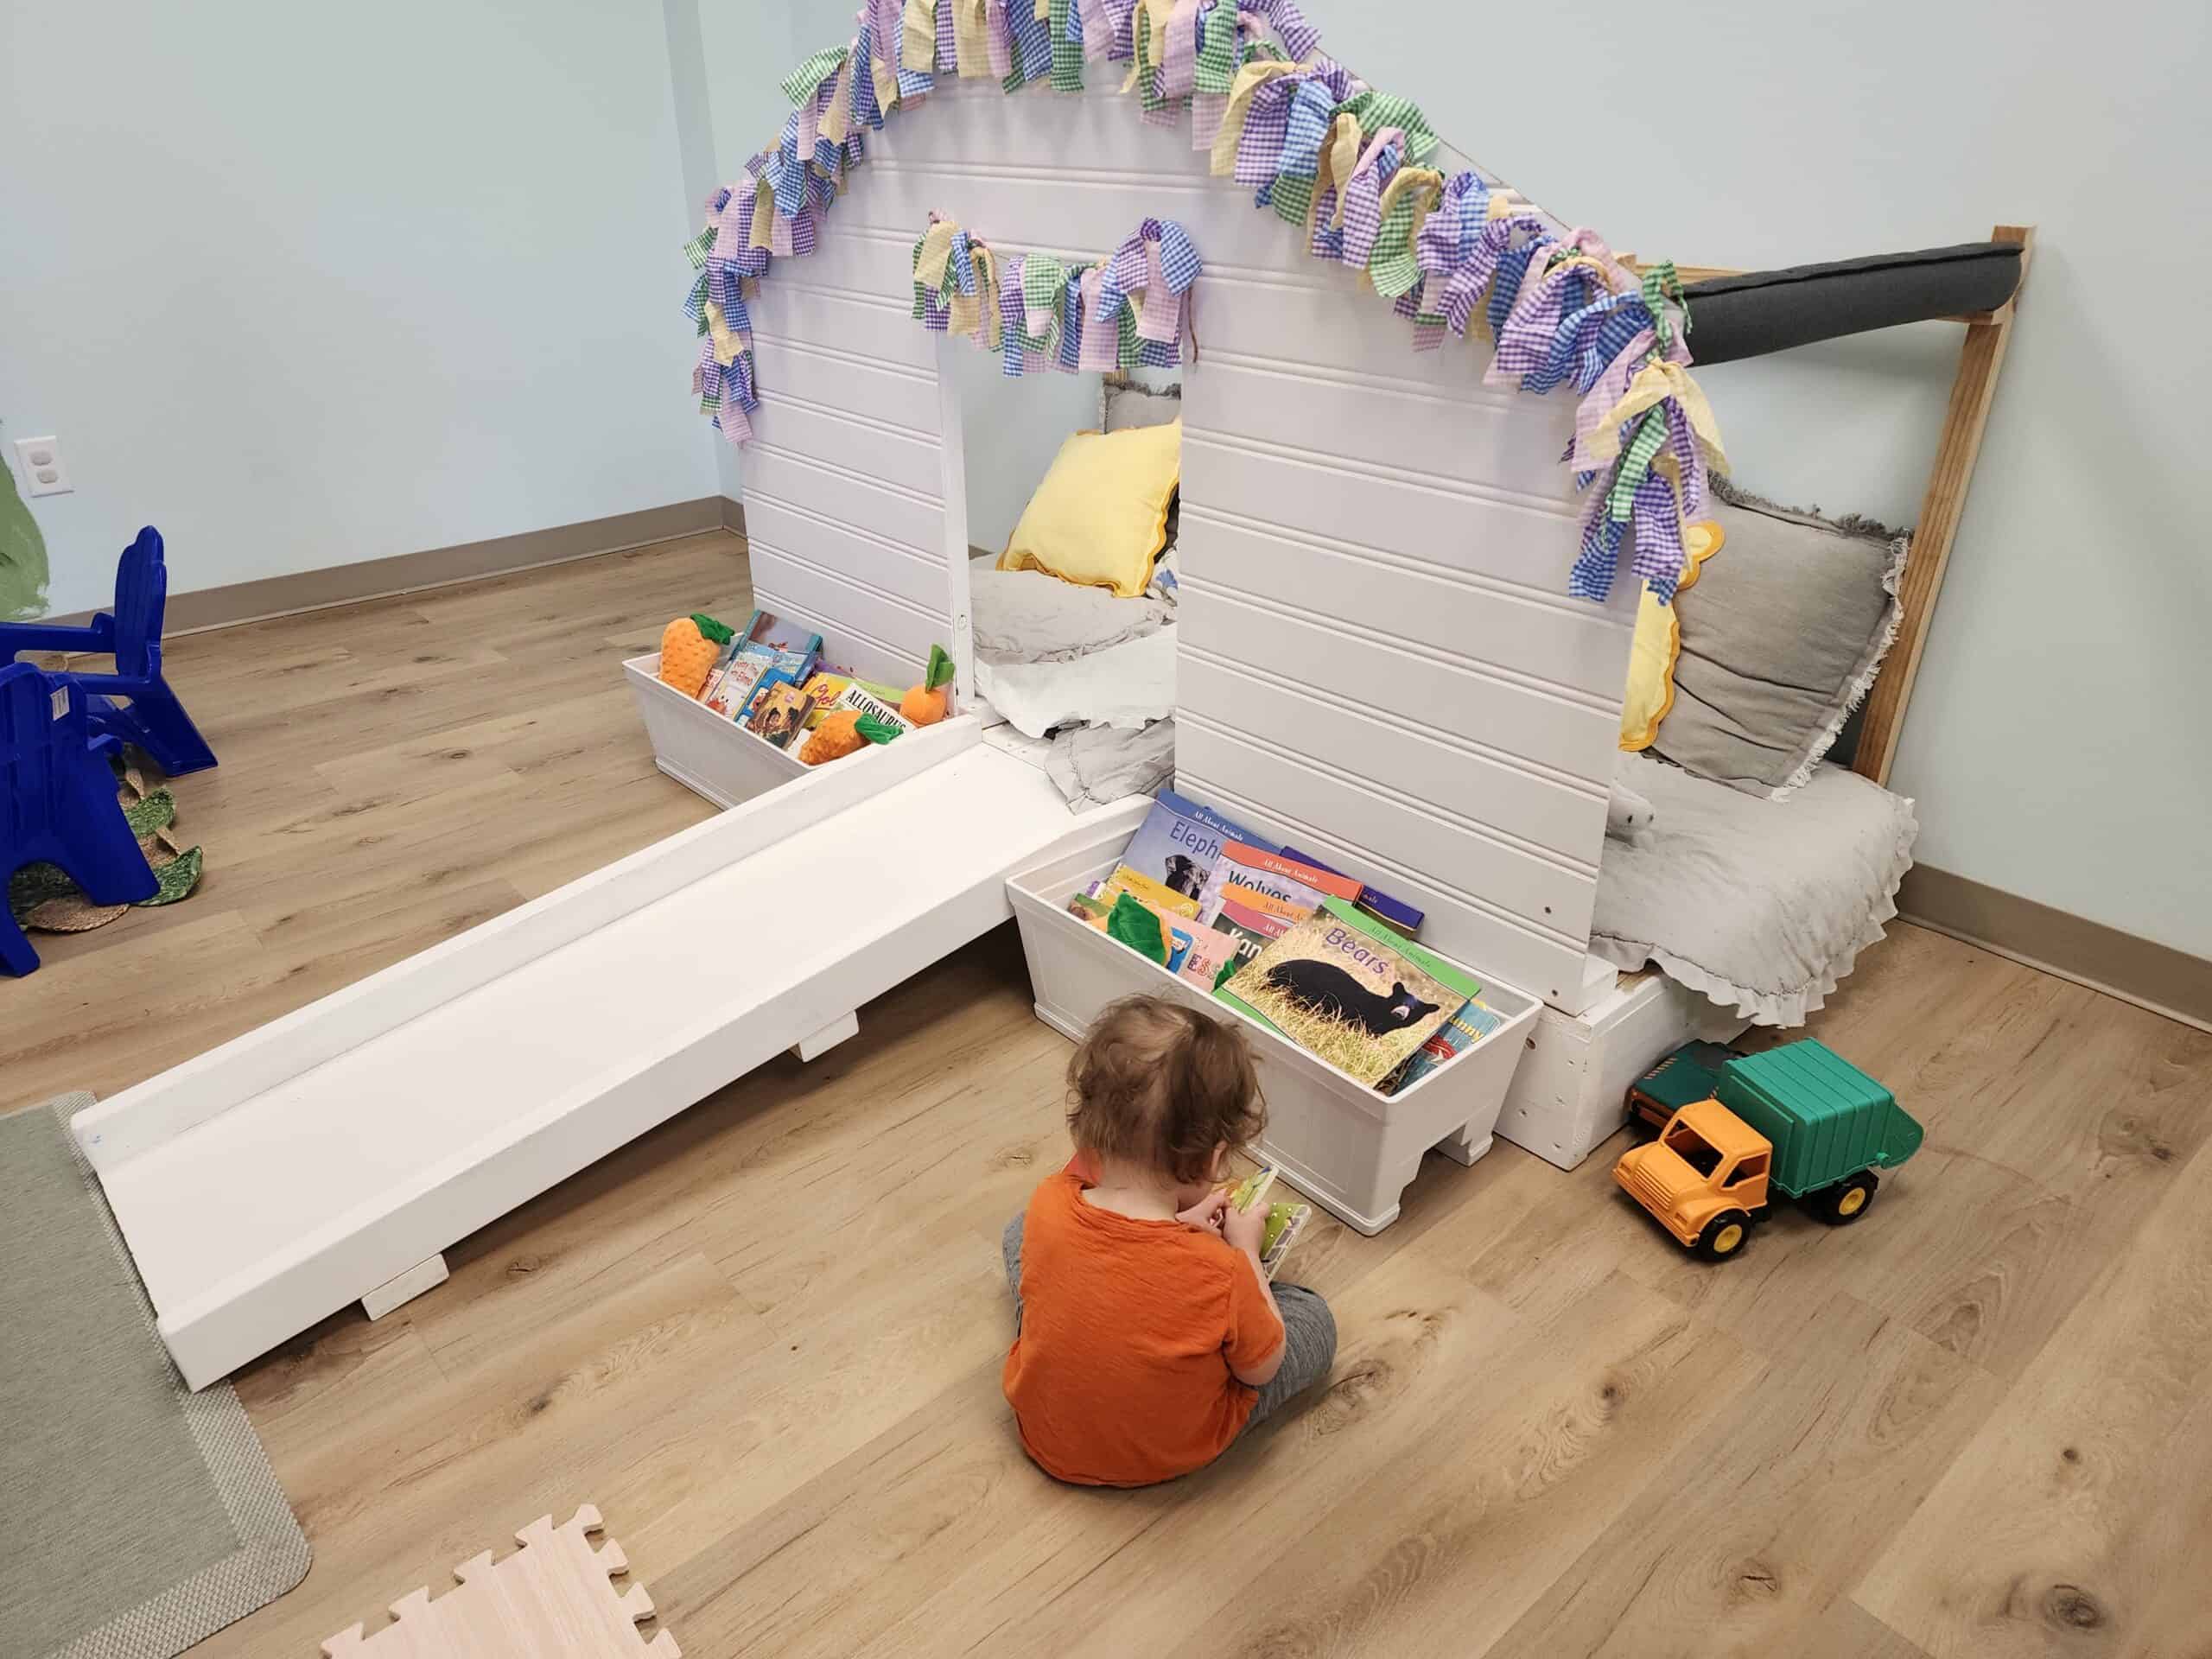 A child engrossed in reading books in the cozy book nook of Bumble Brews indoor playground in Raleigh, NC, with a soft fabric garland overhead and a gentle slide, encouraging quiet time and reading in a playful setting.